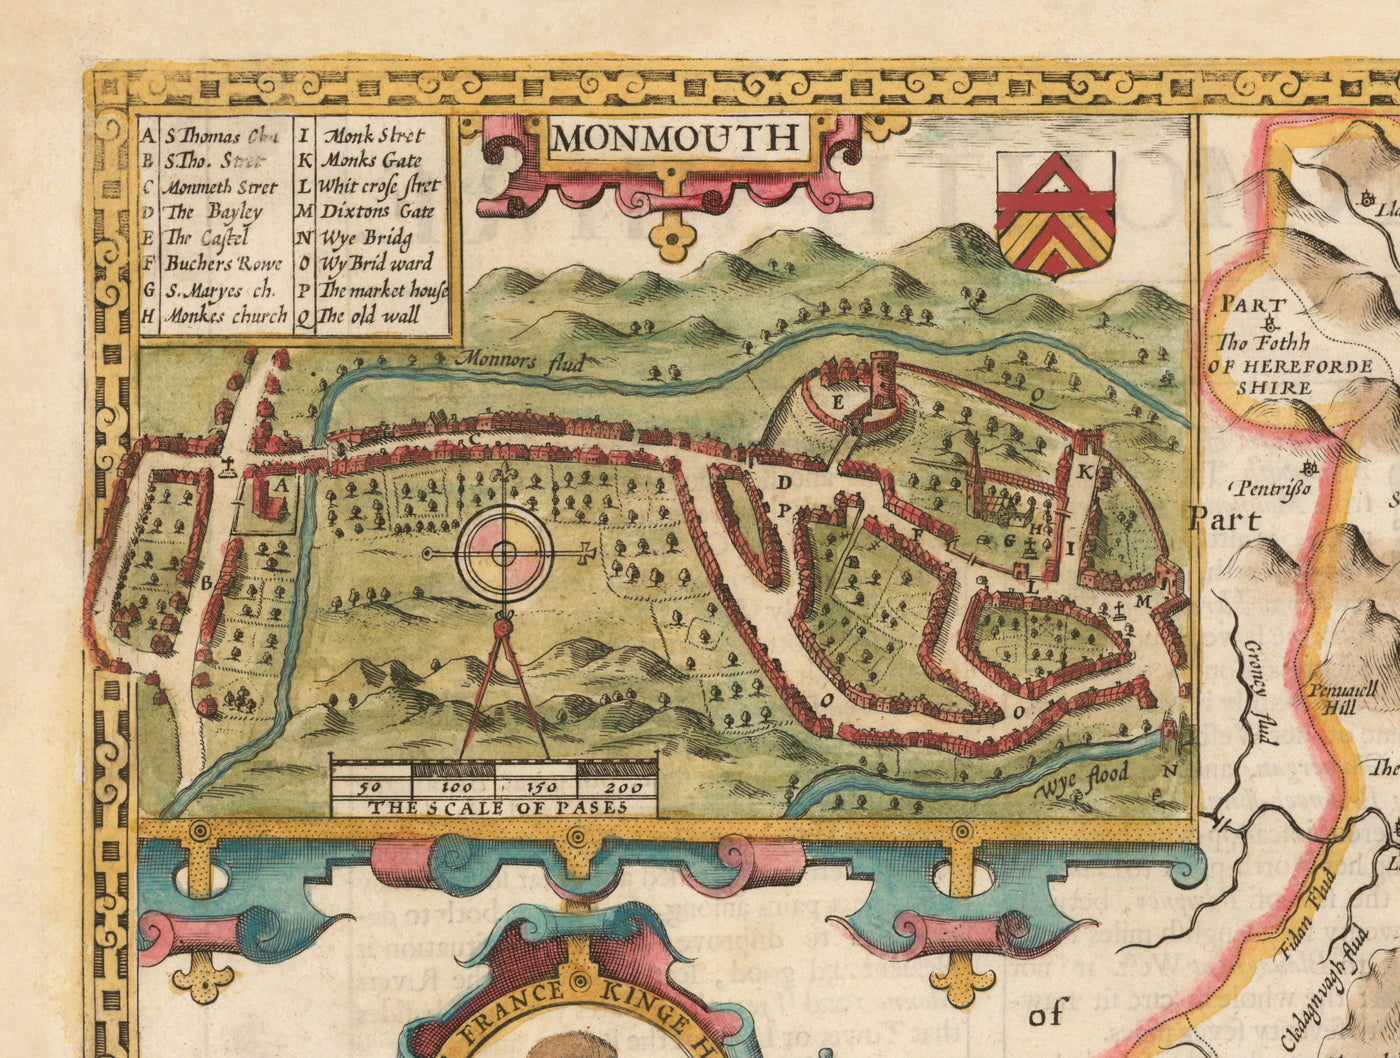 Old Map of Monmouthshire, Wales, 1611 by John Speed - Abergavenny, Caldicot, Chepstow, Monmouth, Magor